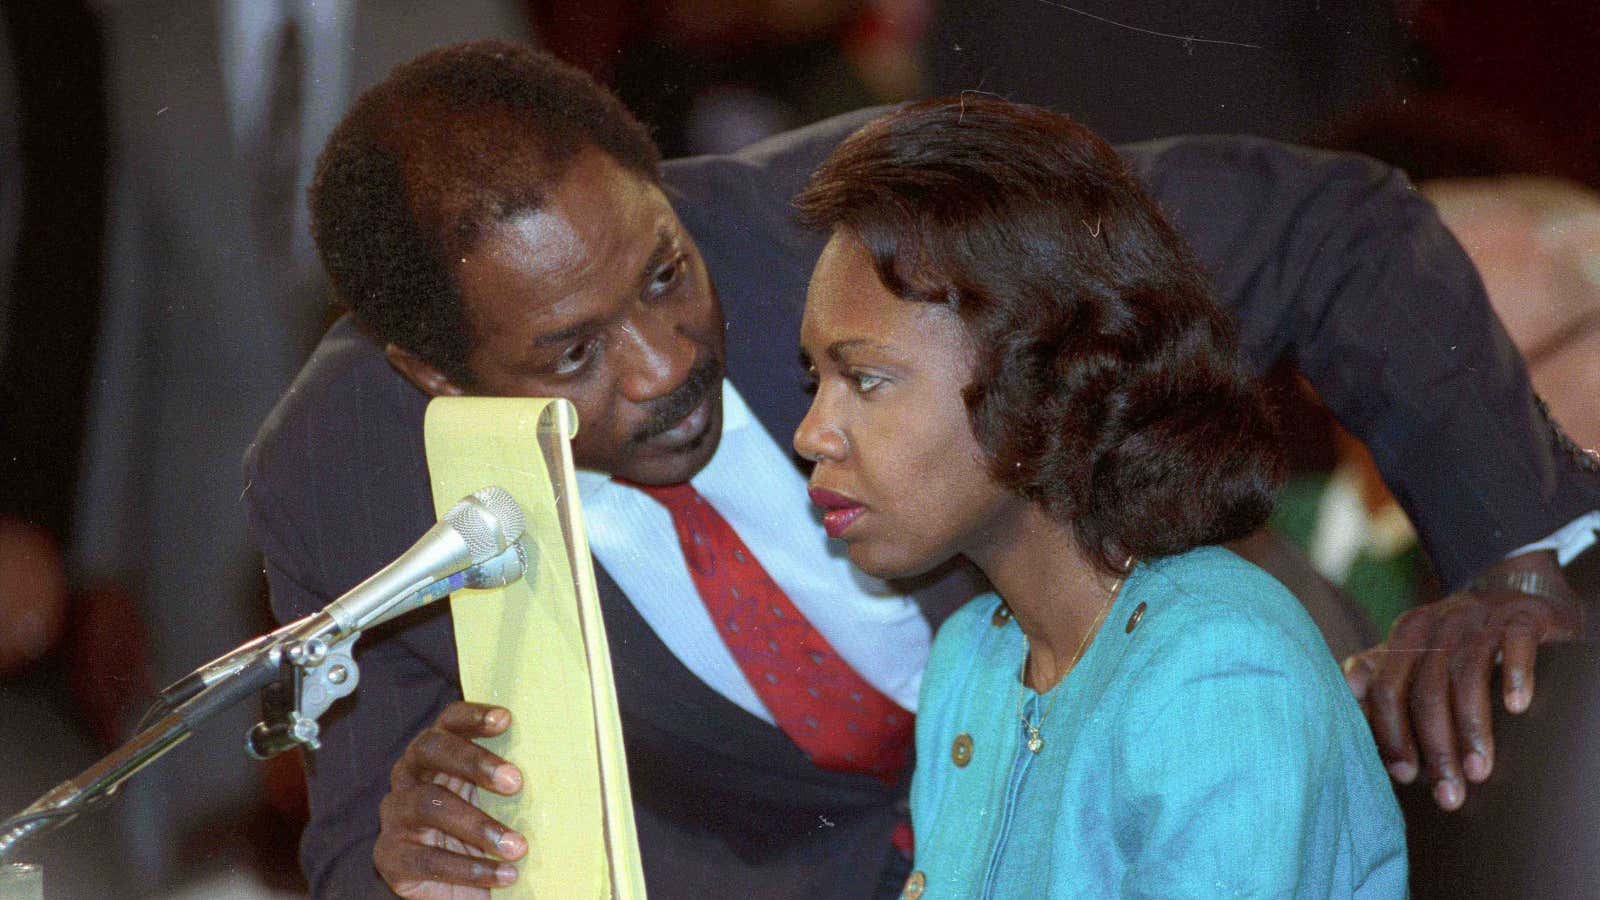 Anita Hill during her testimony in October 1991.